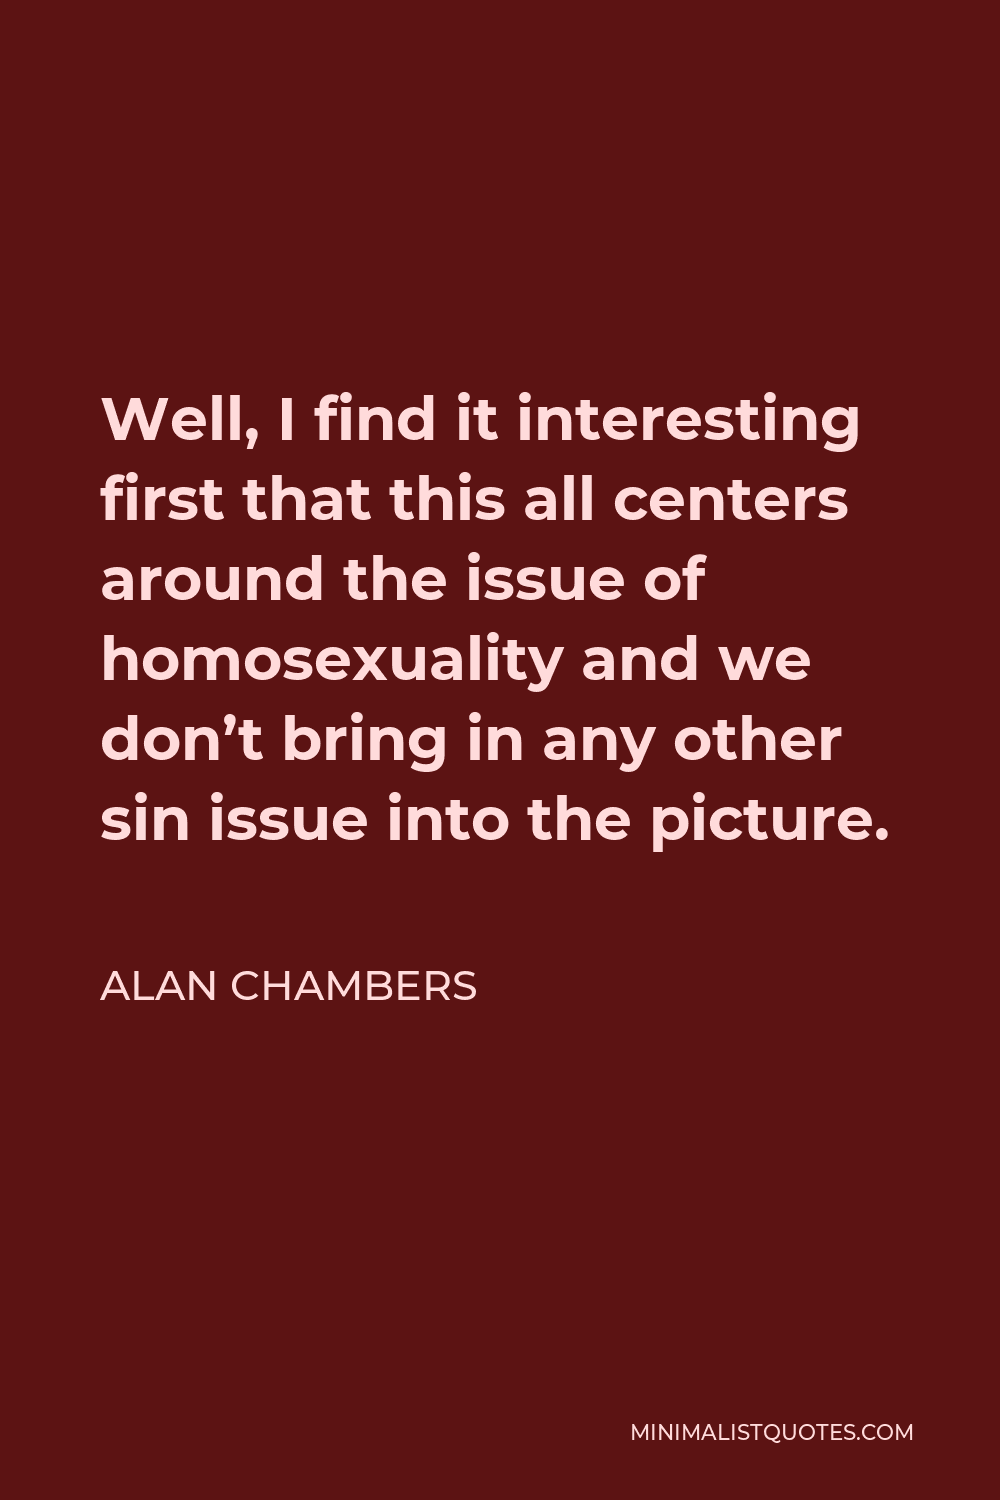 Alan Chambers Quote - Well, I find it interesting first that this all centers around the issue of homosexuality and we don’t bring in any other sin issue into the picture.